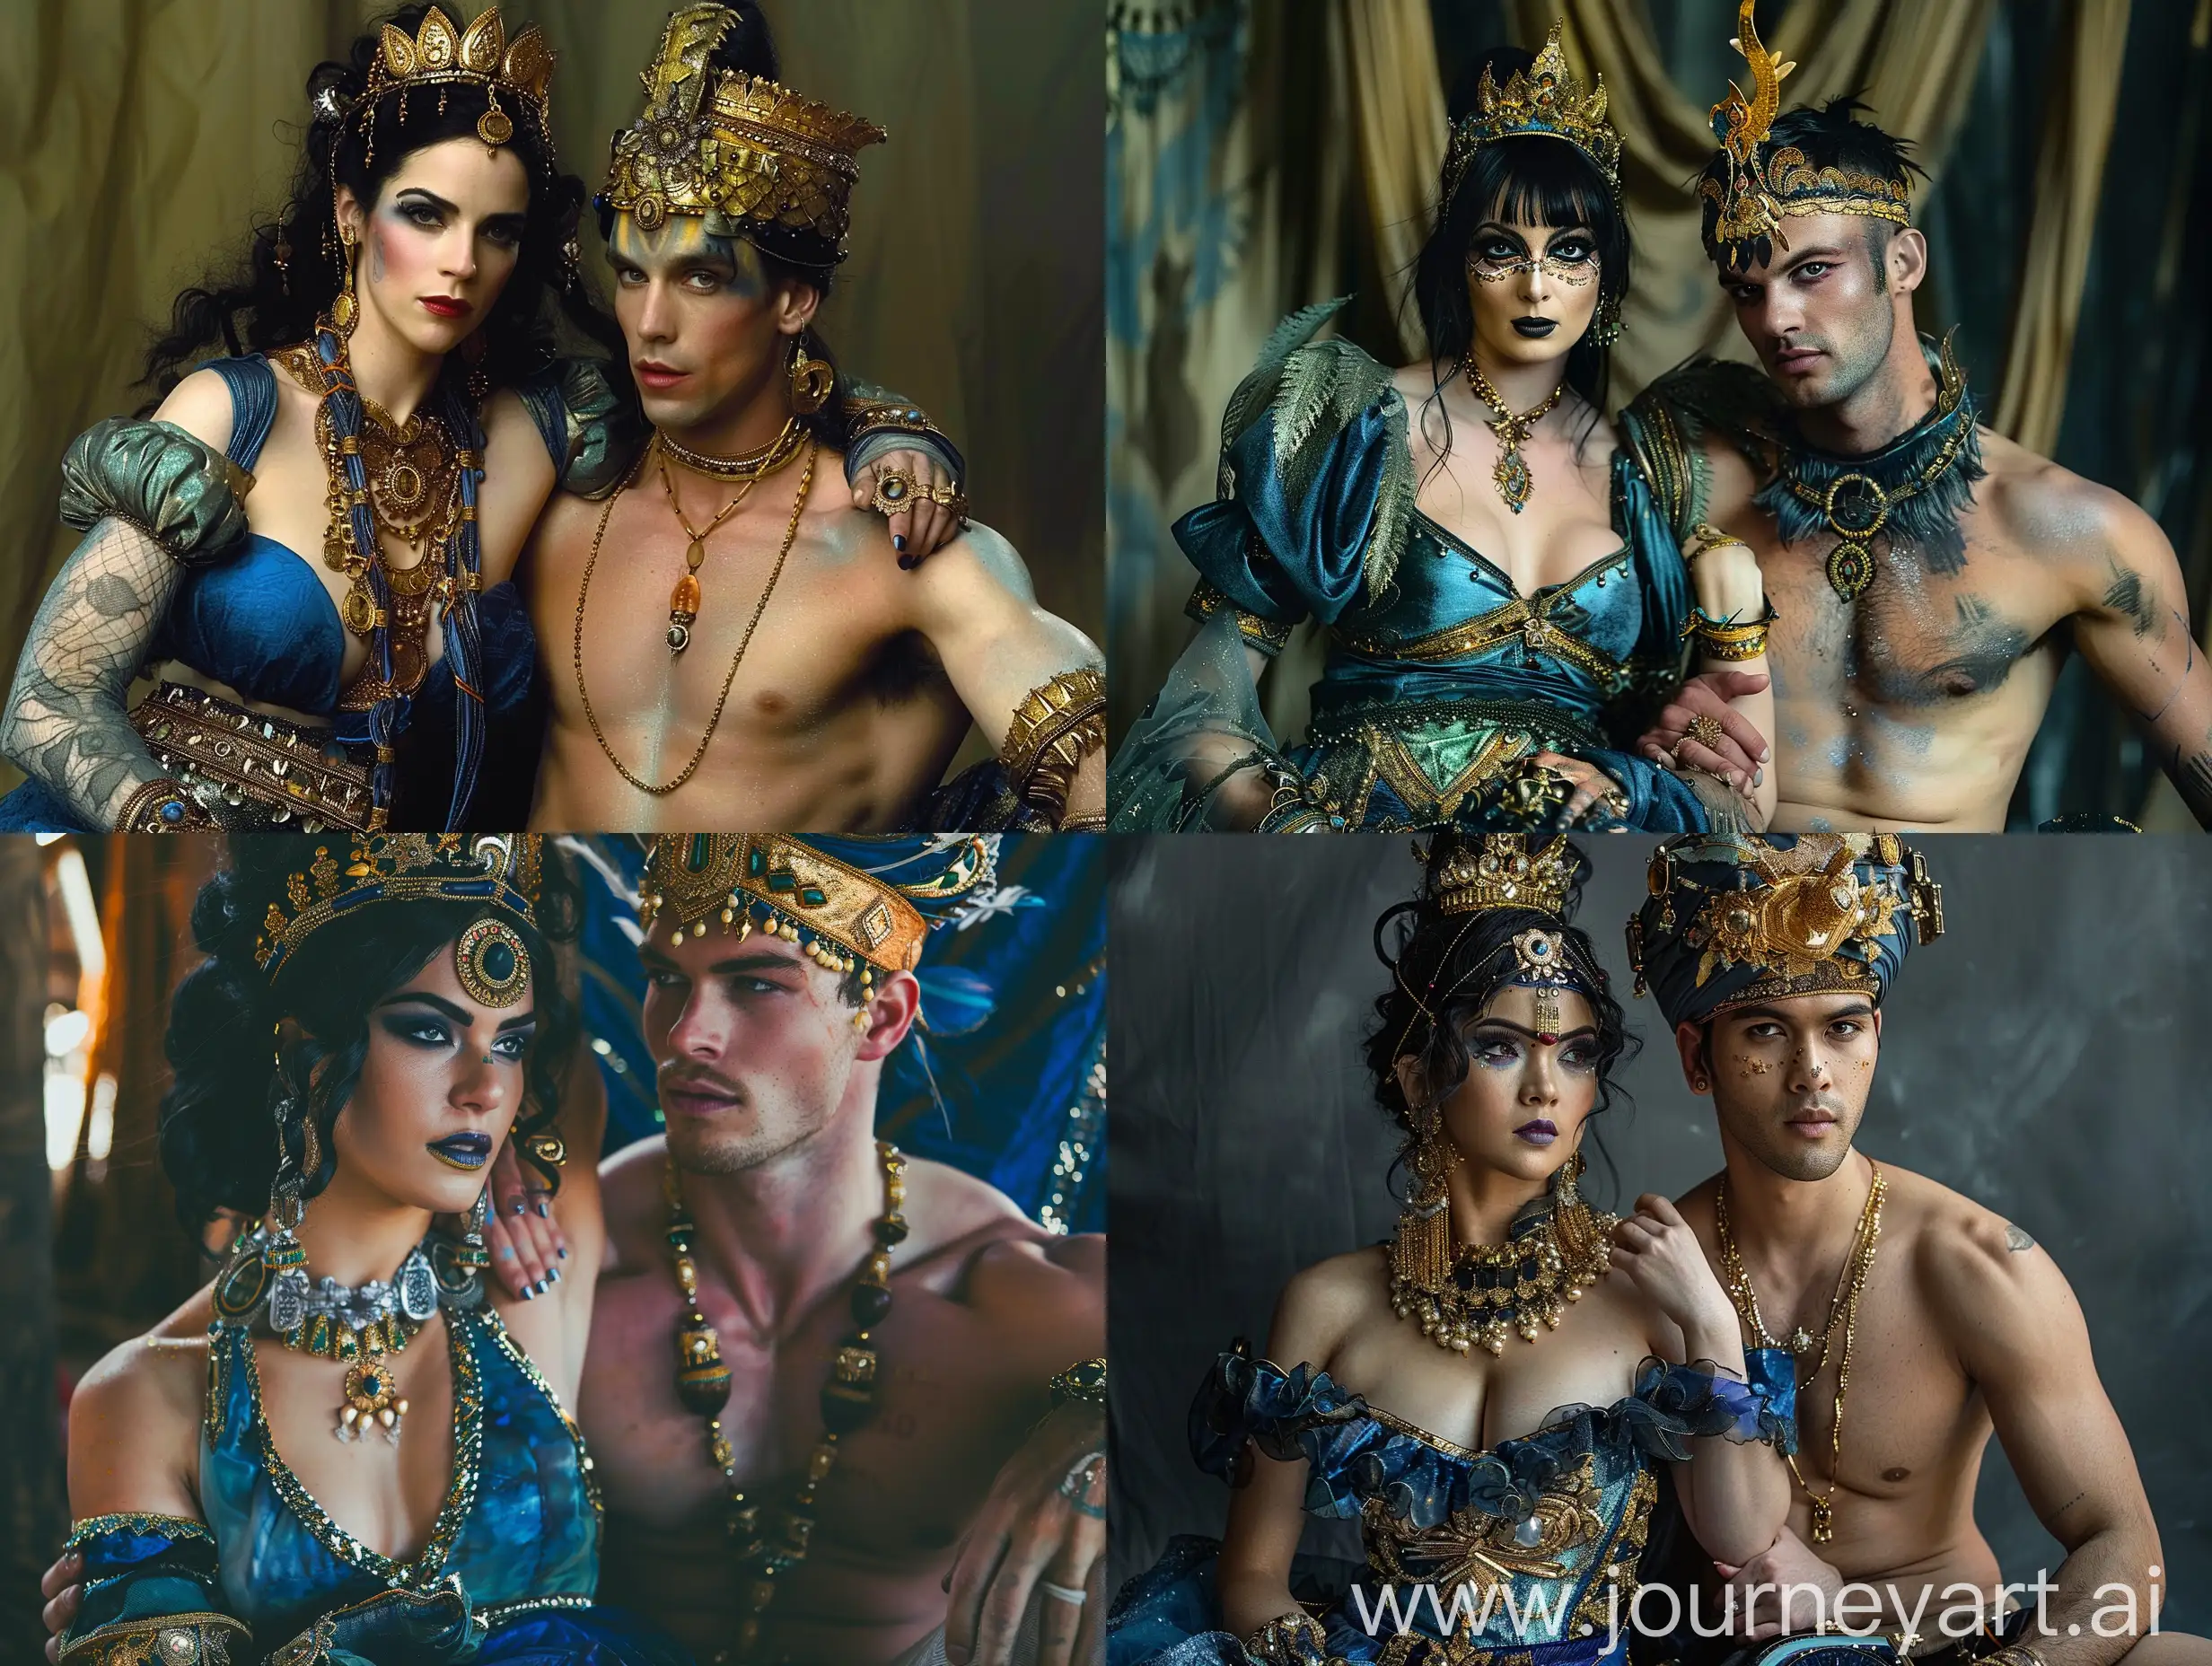 cinematic, A man and woman in ornate costumes sit together. The woman had black hair and wore a blue dress with gold accents and a crown. The man is shirtless and has a headdress with gold details. They both had elaborate jewelry and makeup.